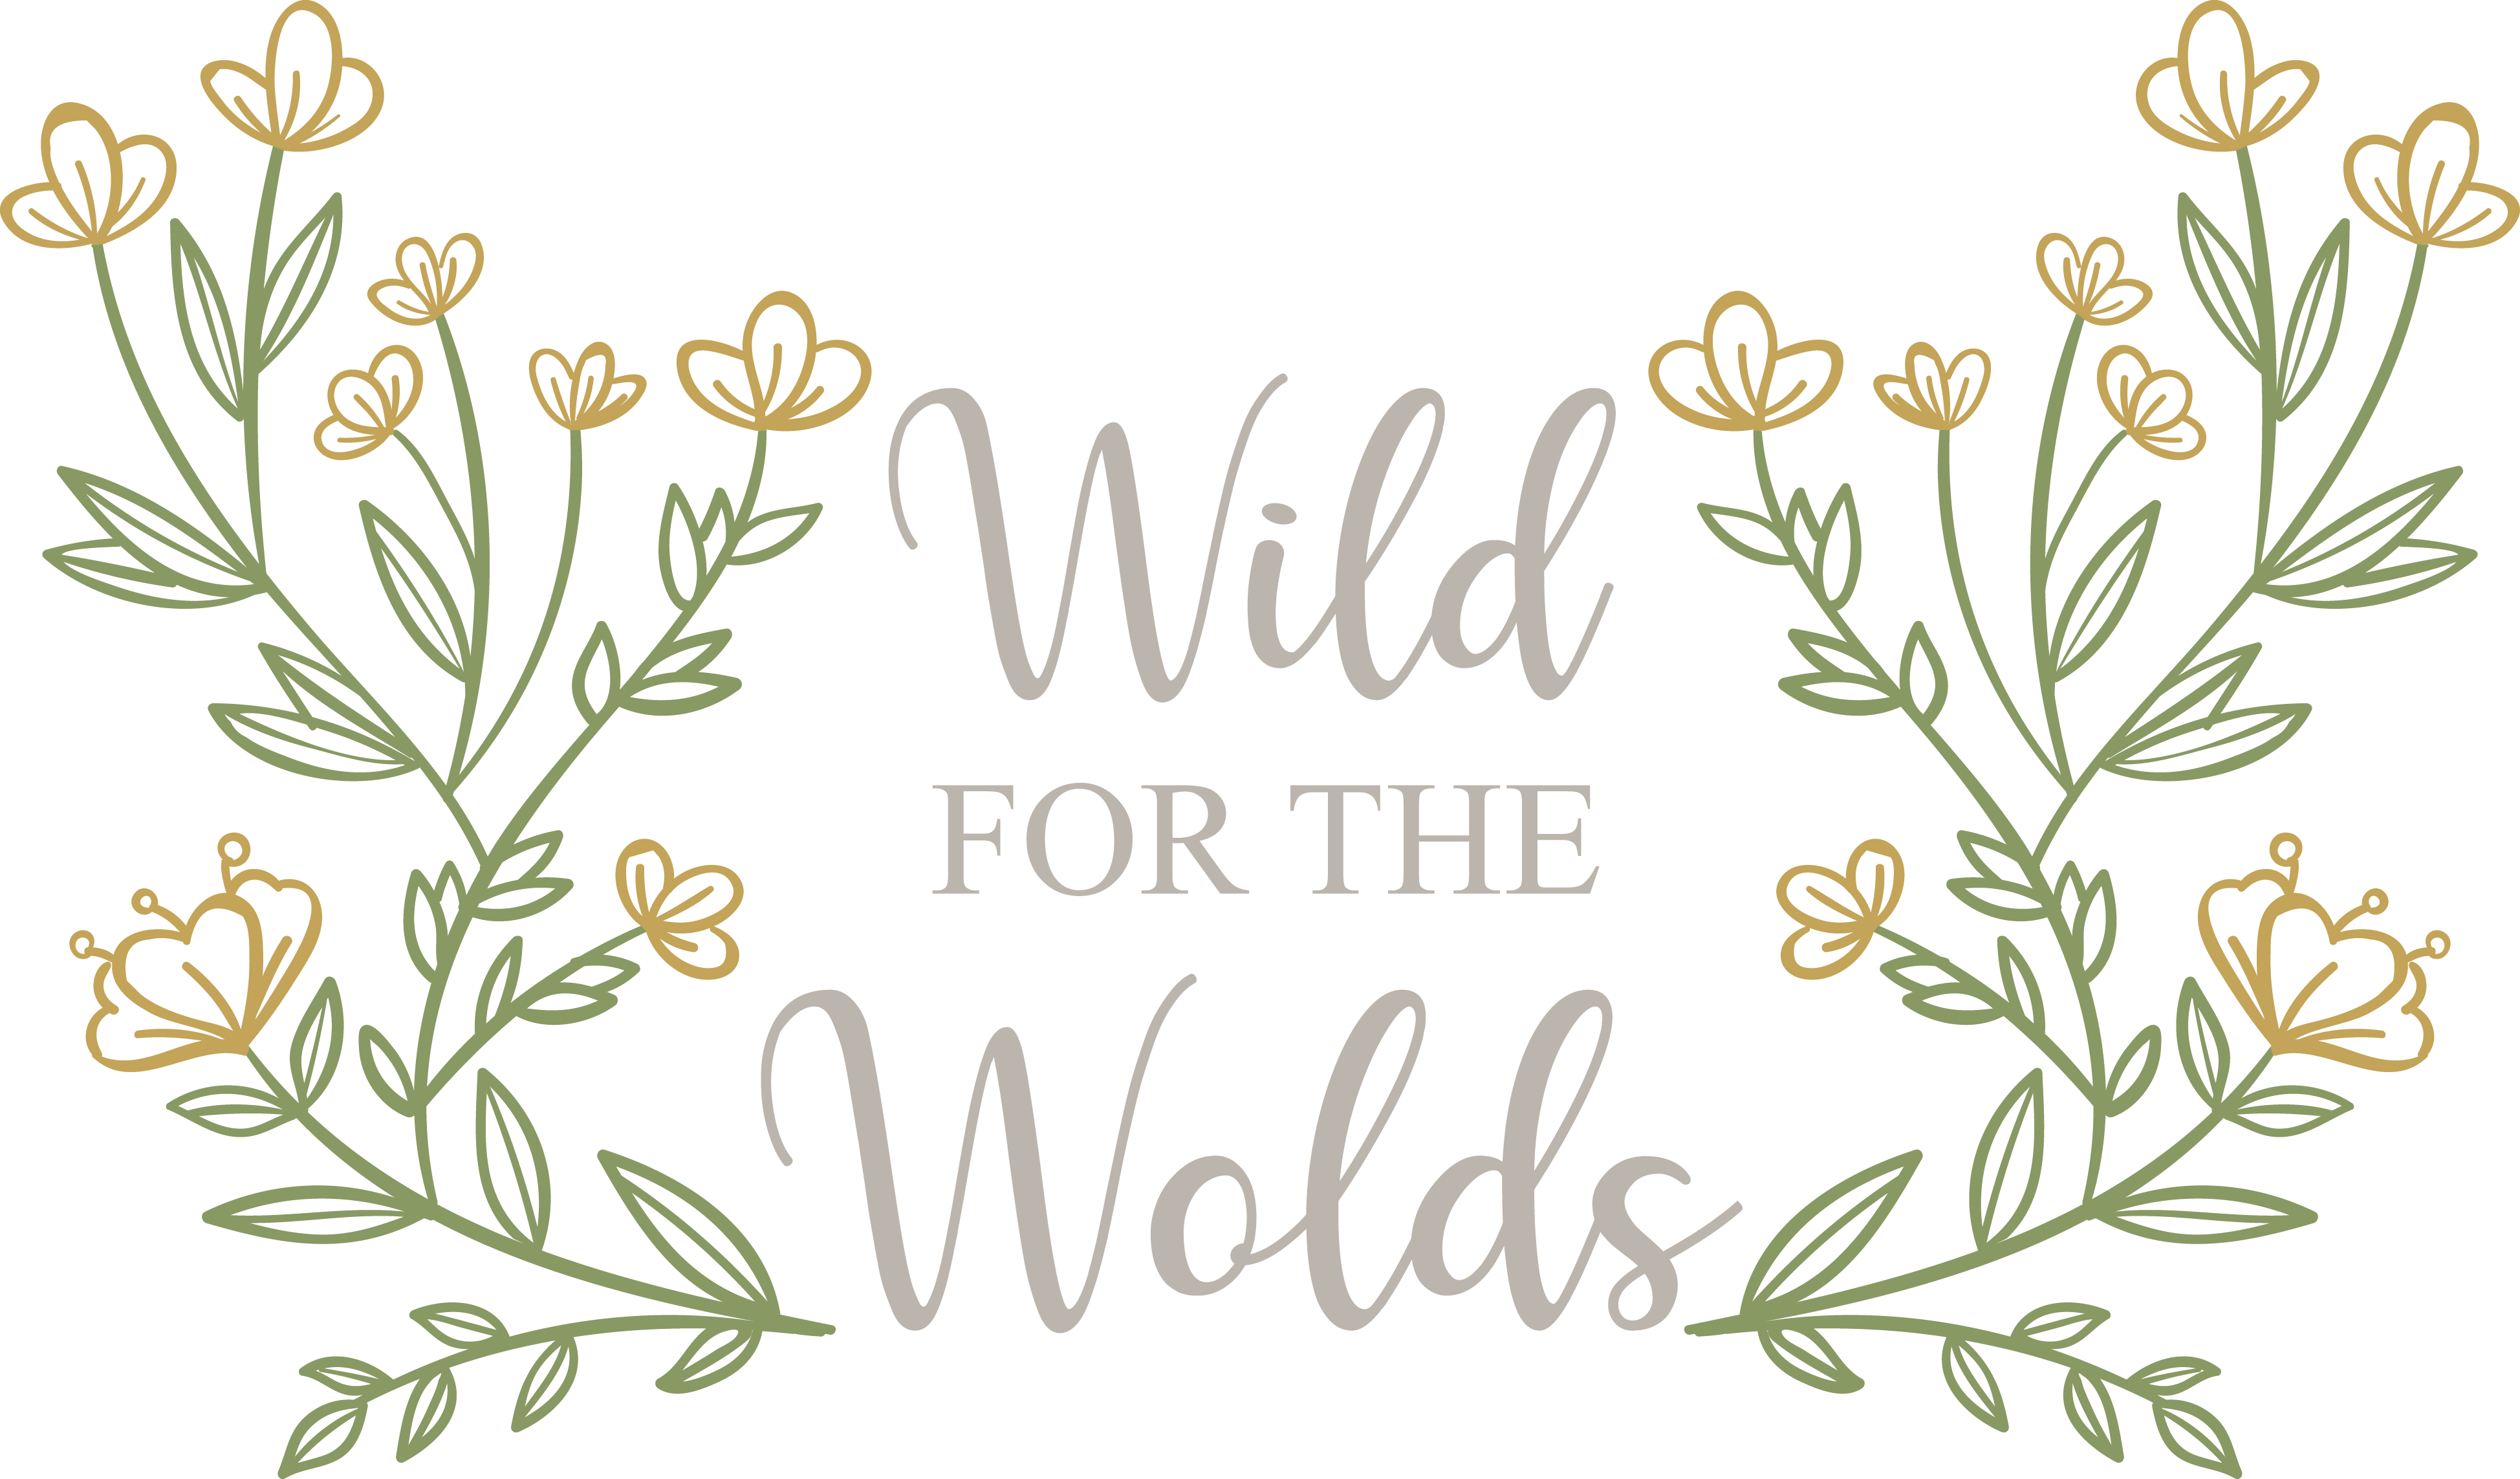 Wild for the Wolds